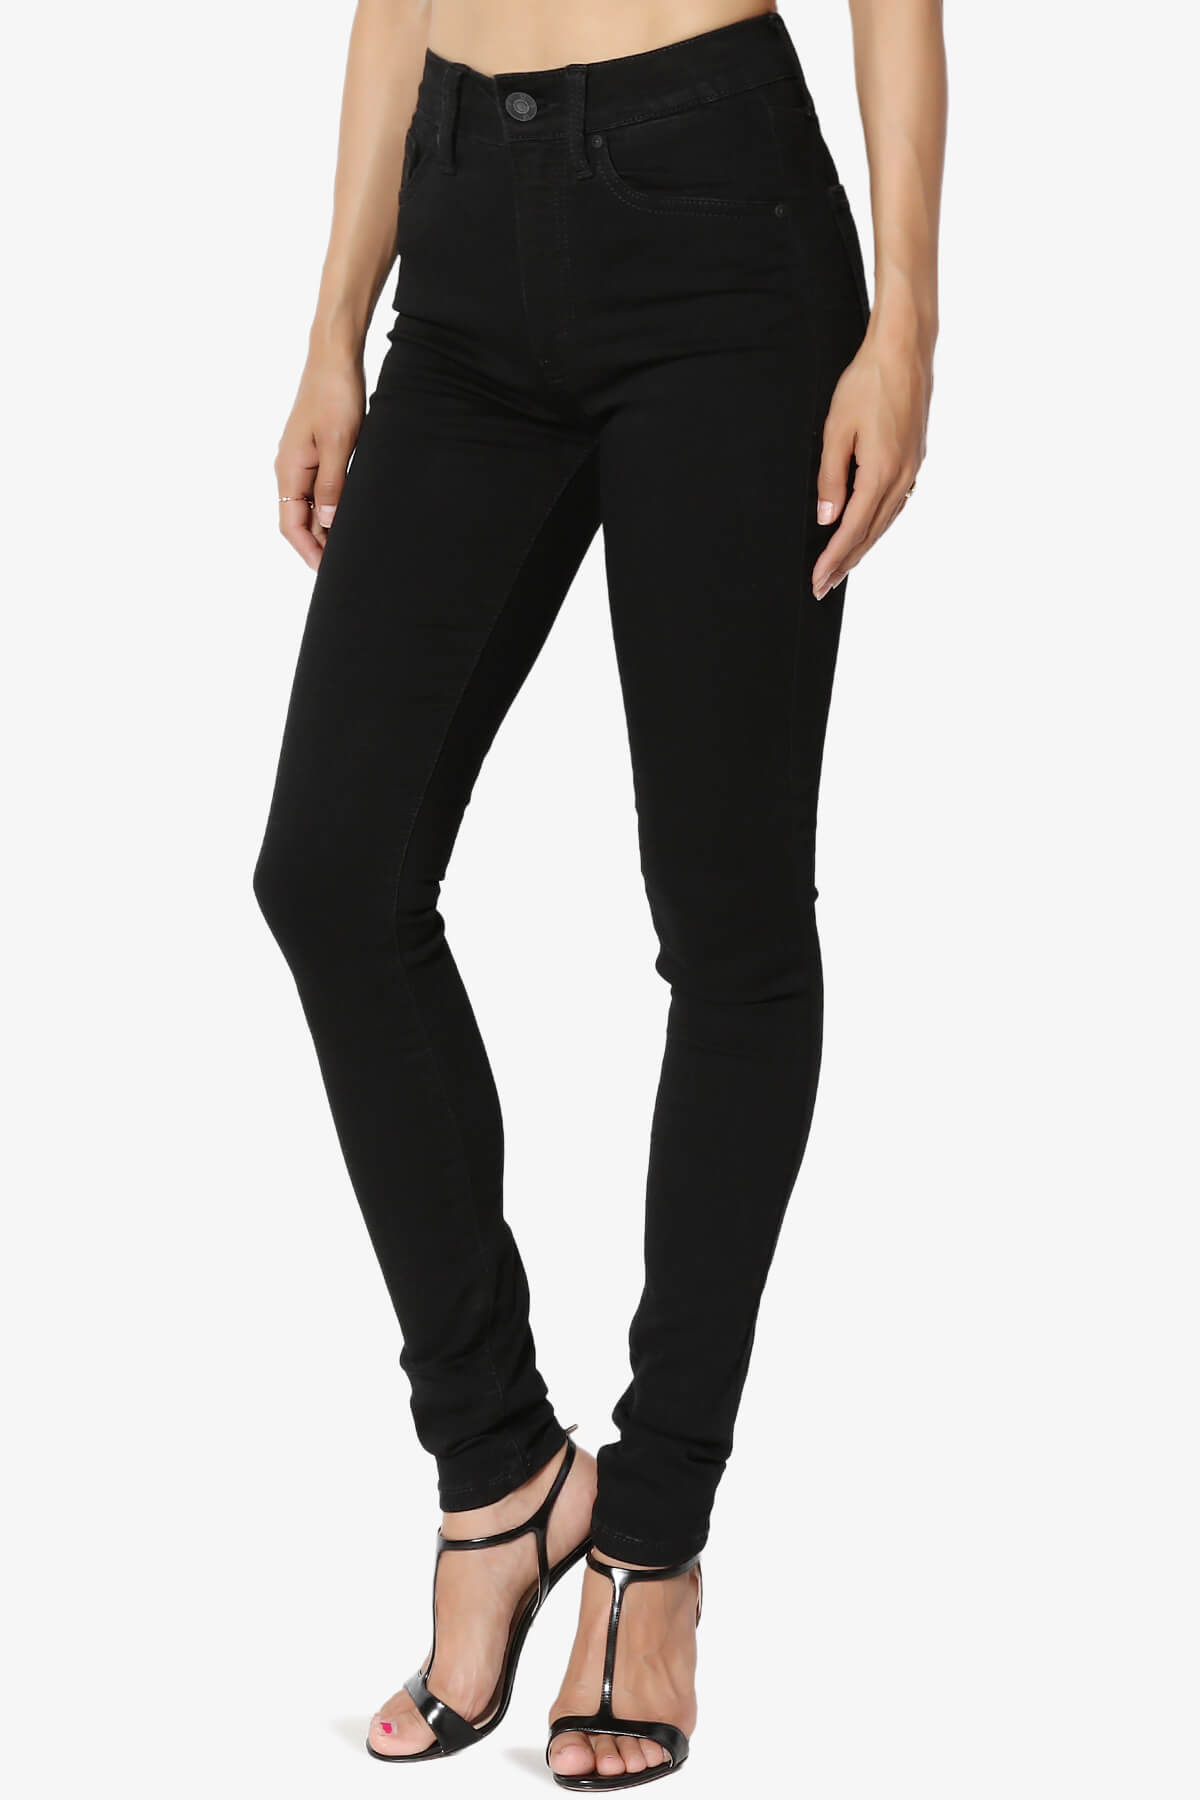 Women's High Rise 5 Pocket Soft & Stretch Denim 28in Inseam Ankle Skinnny Jeans - image 3 of 7